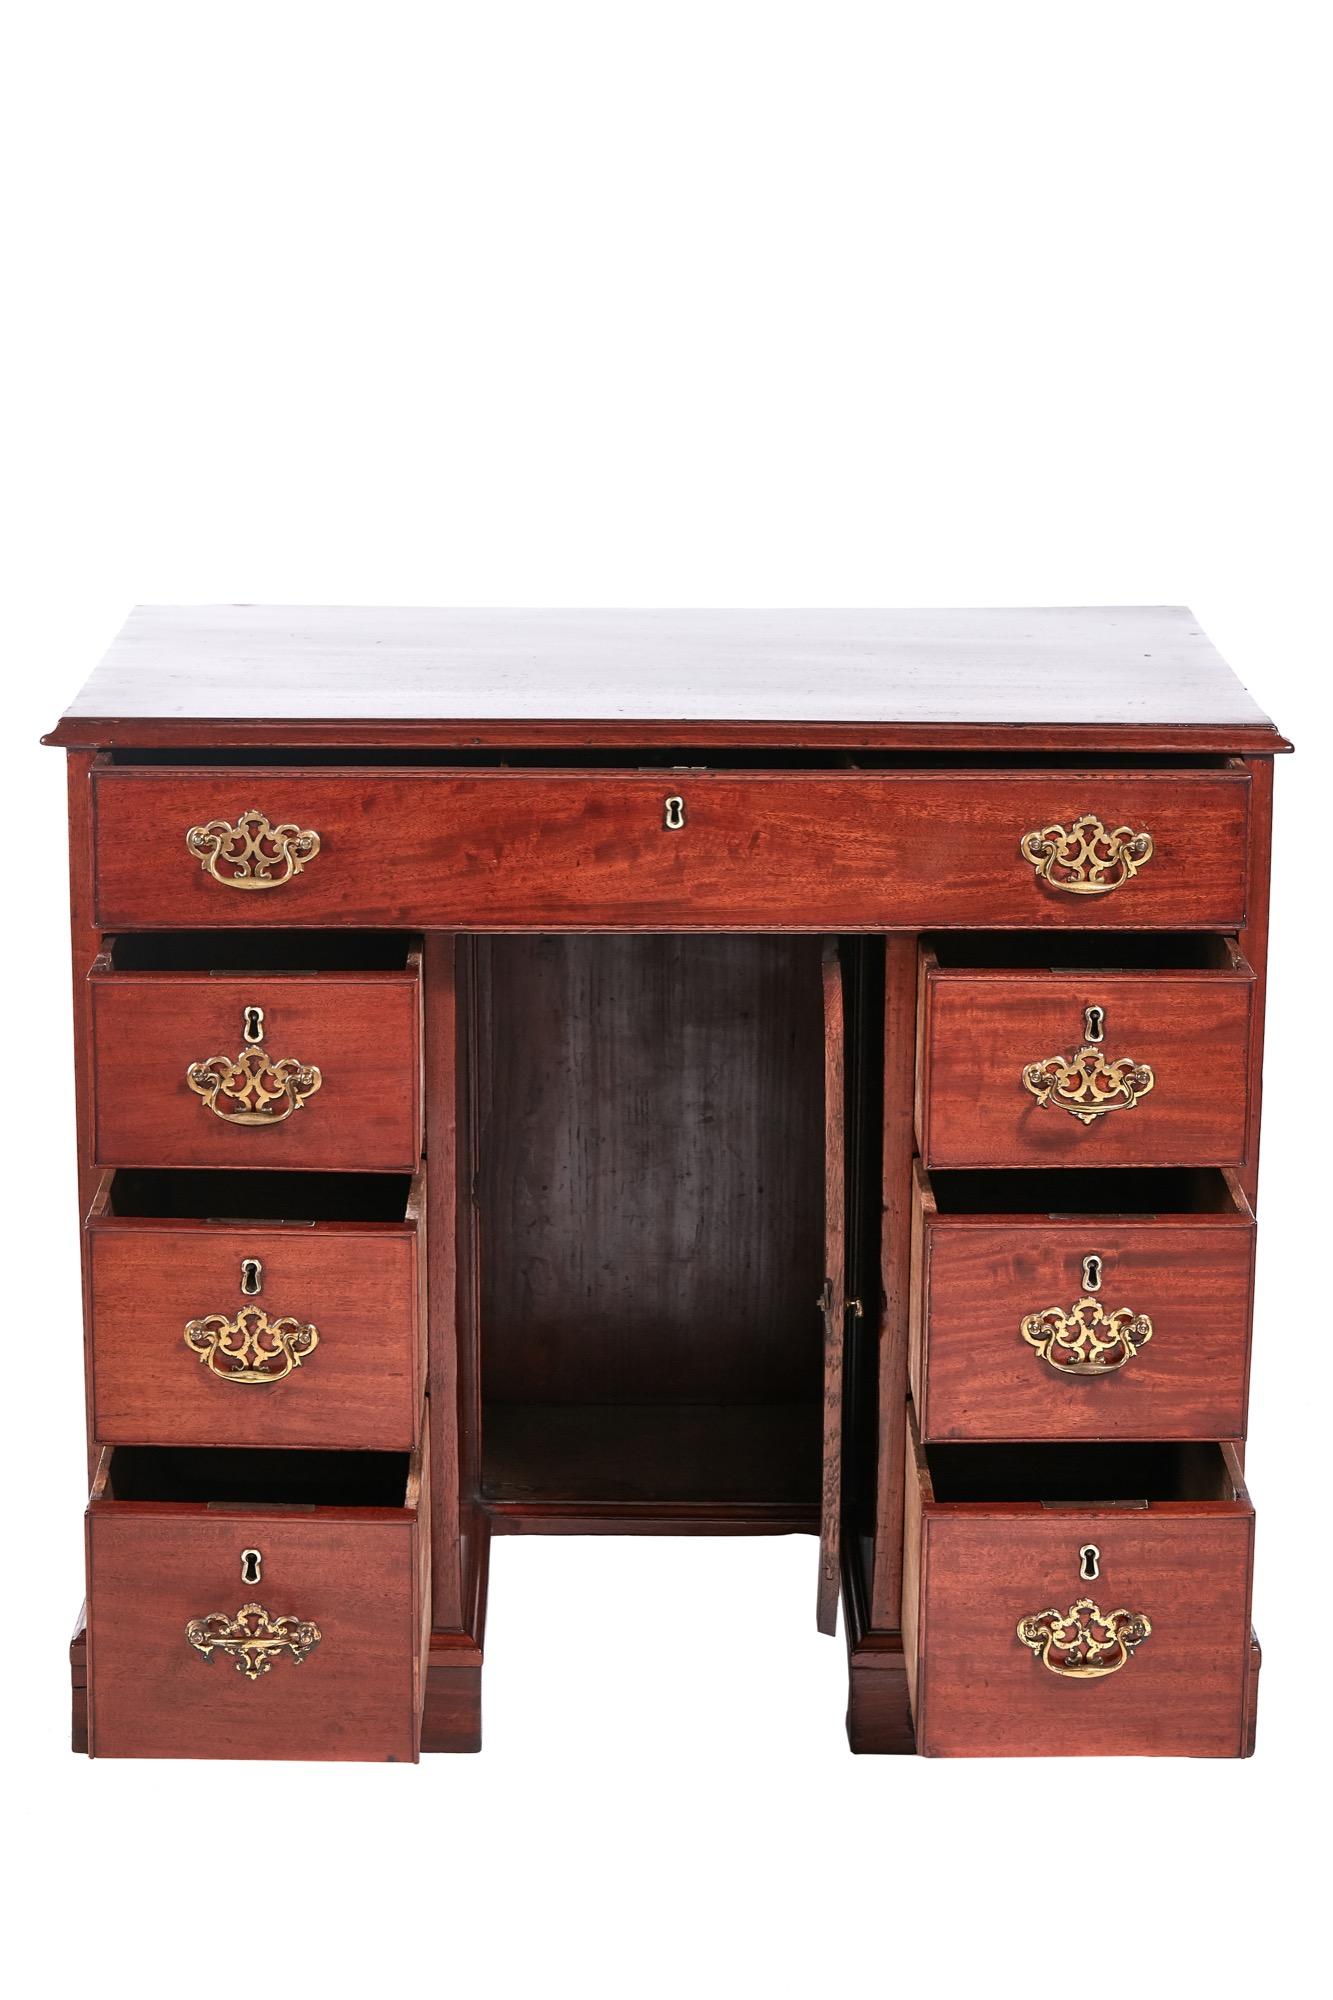 Antique George III antique mahogany writing desk having a splendid mahogany top with moulded edge. One long drawer and six smaller drawers. It is all oak lined with brass handles and has one central cupboard door. It stands on original bracket